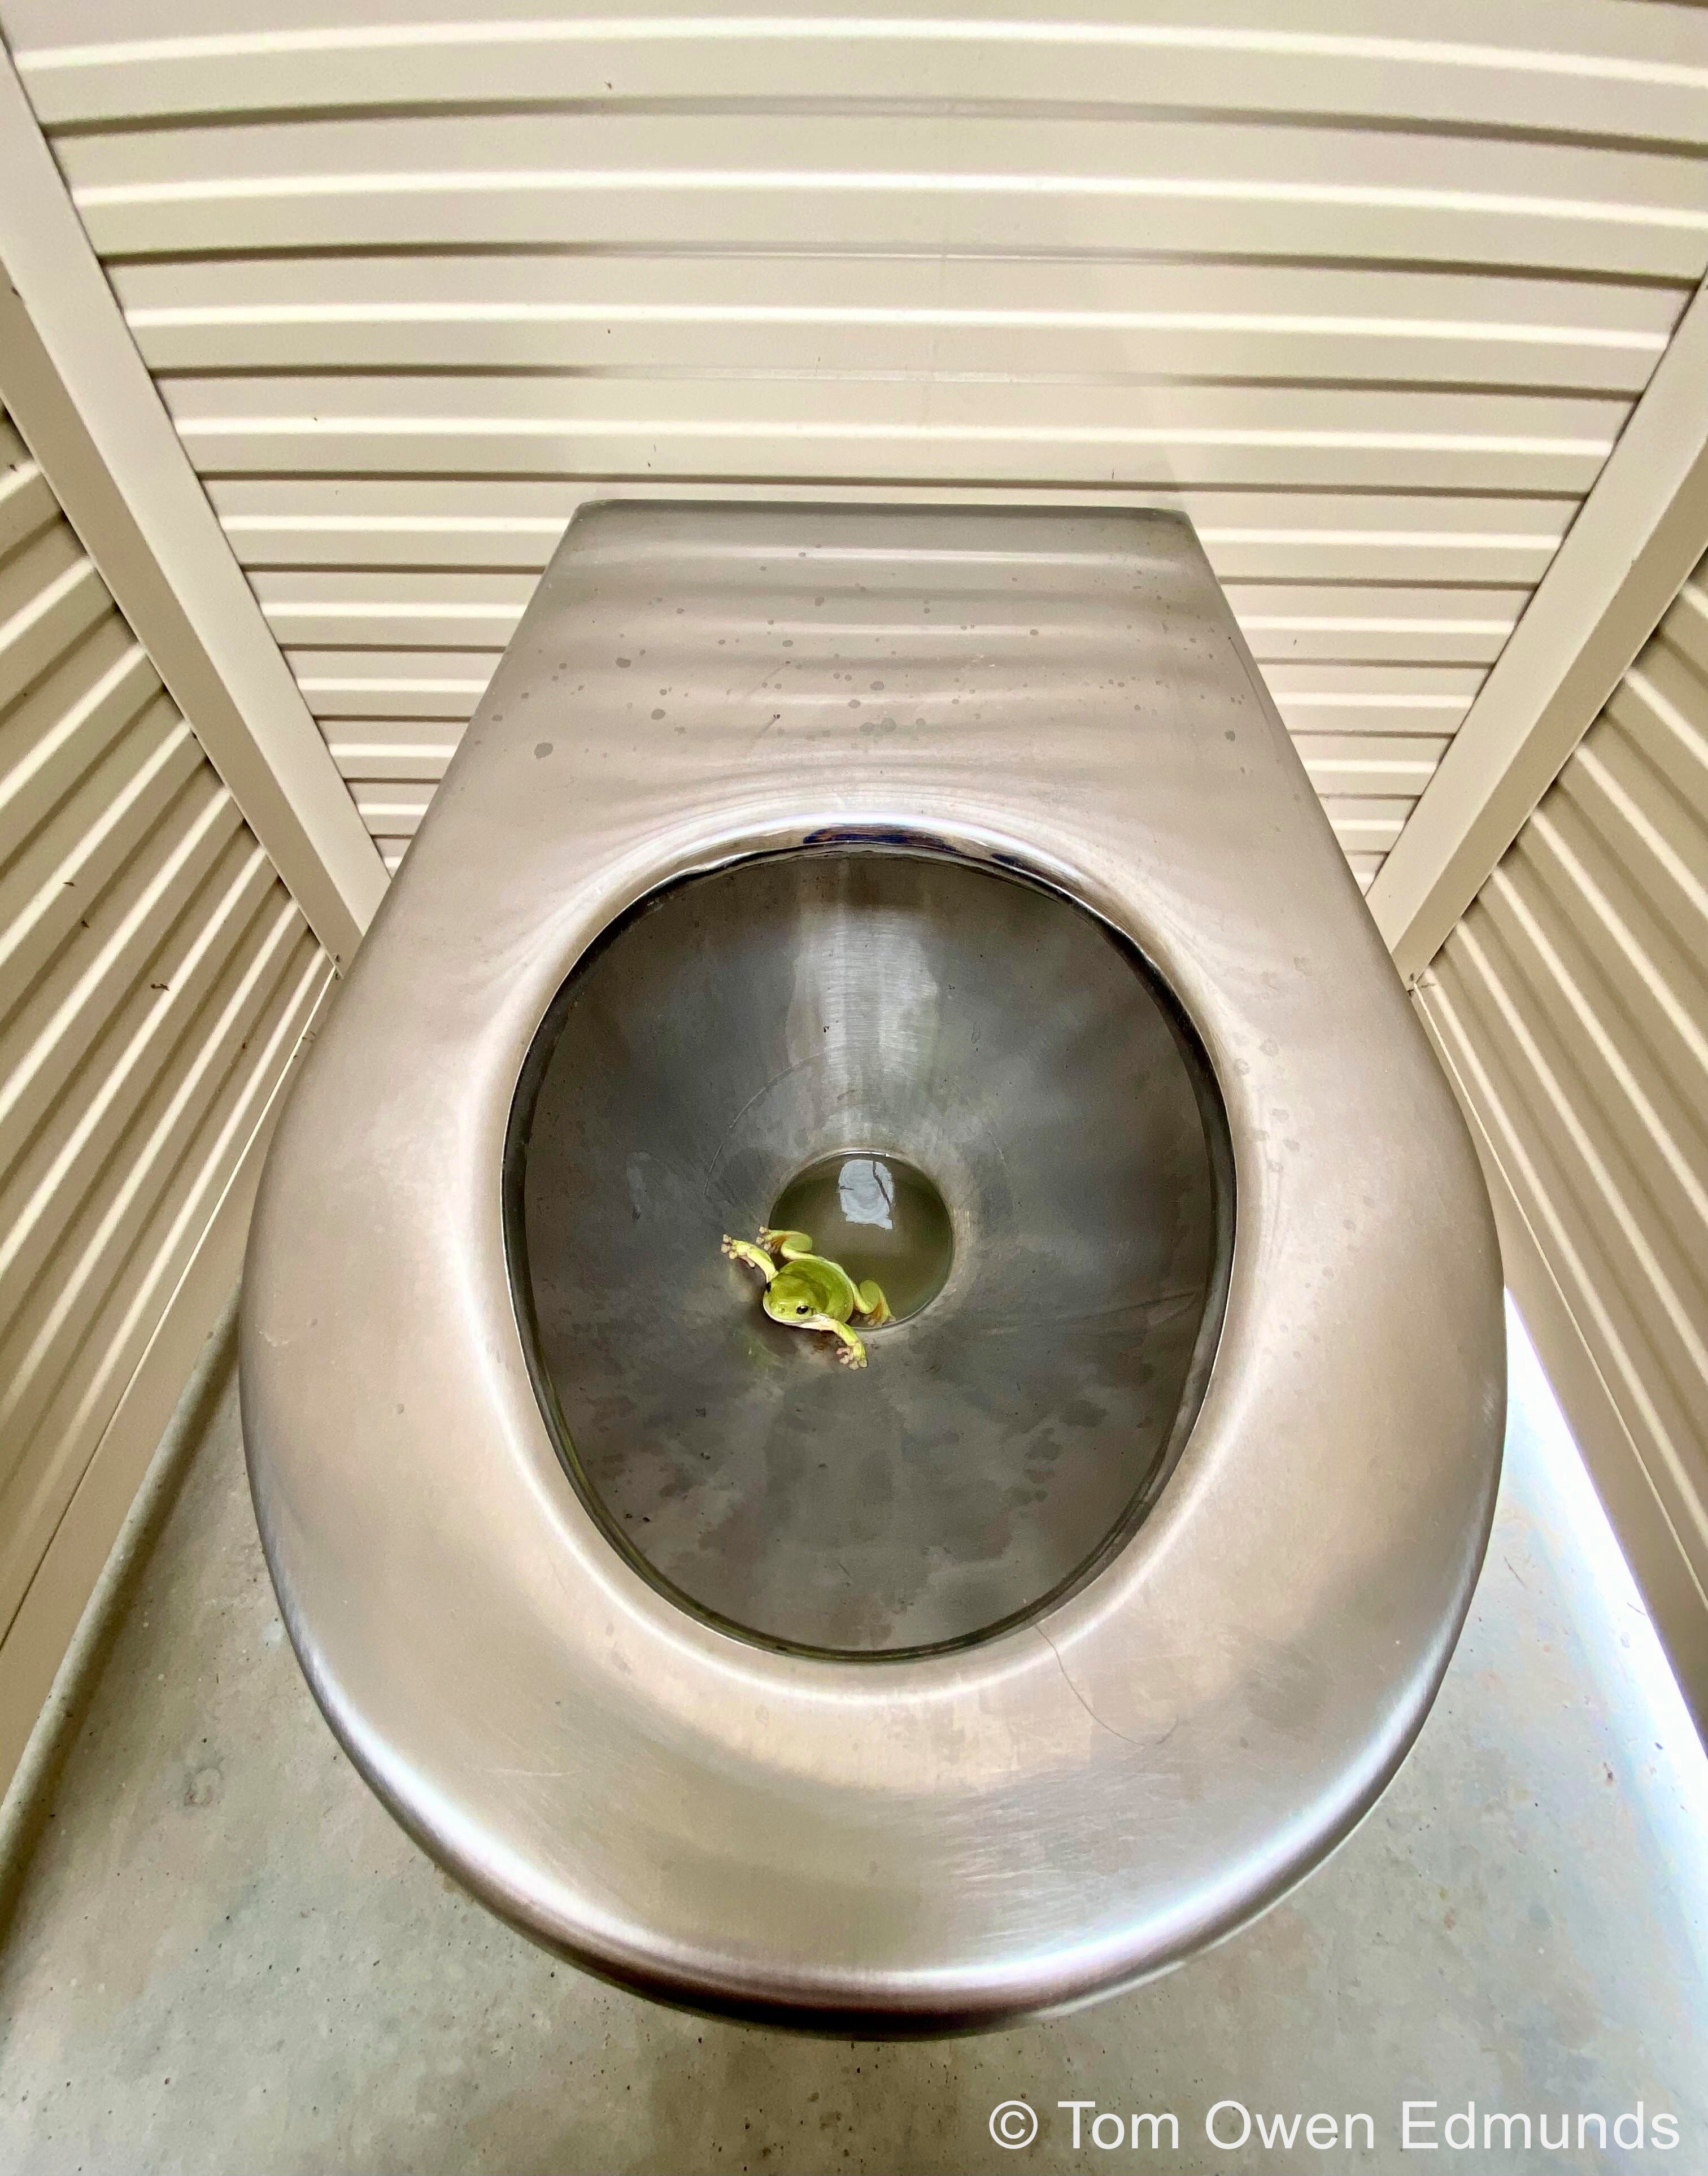 A silver public toilet with a green tree frog in it